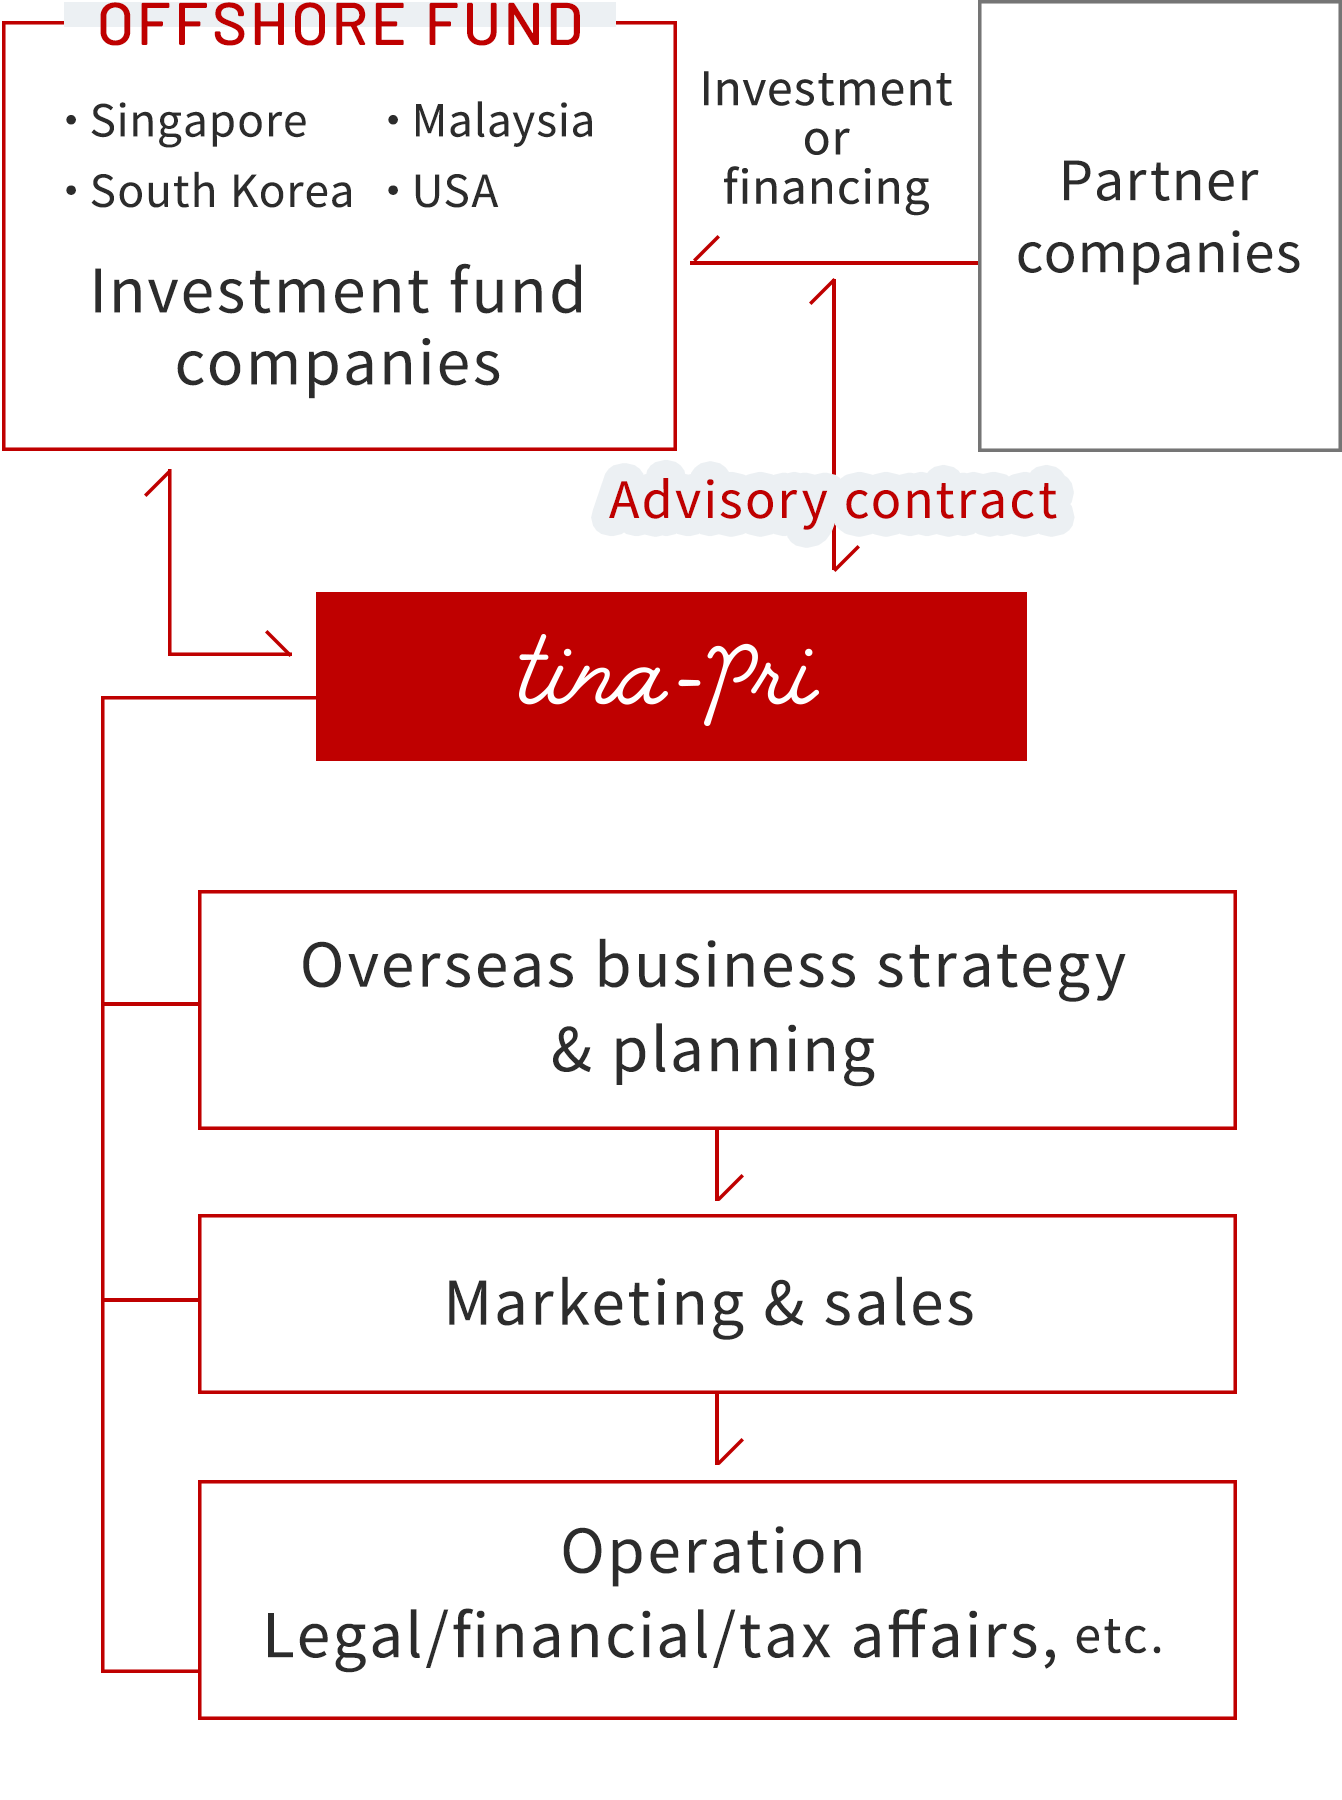 Image of business flow